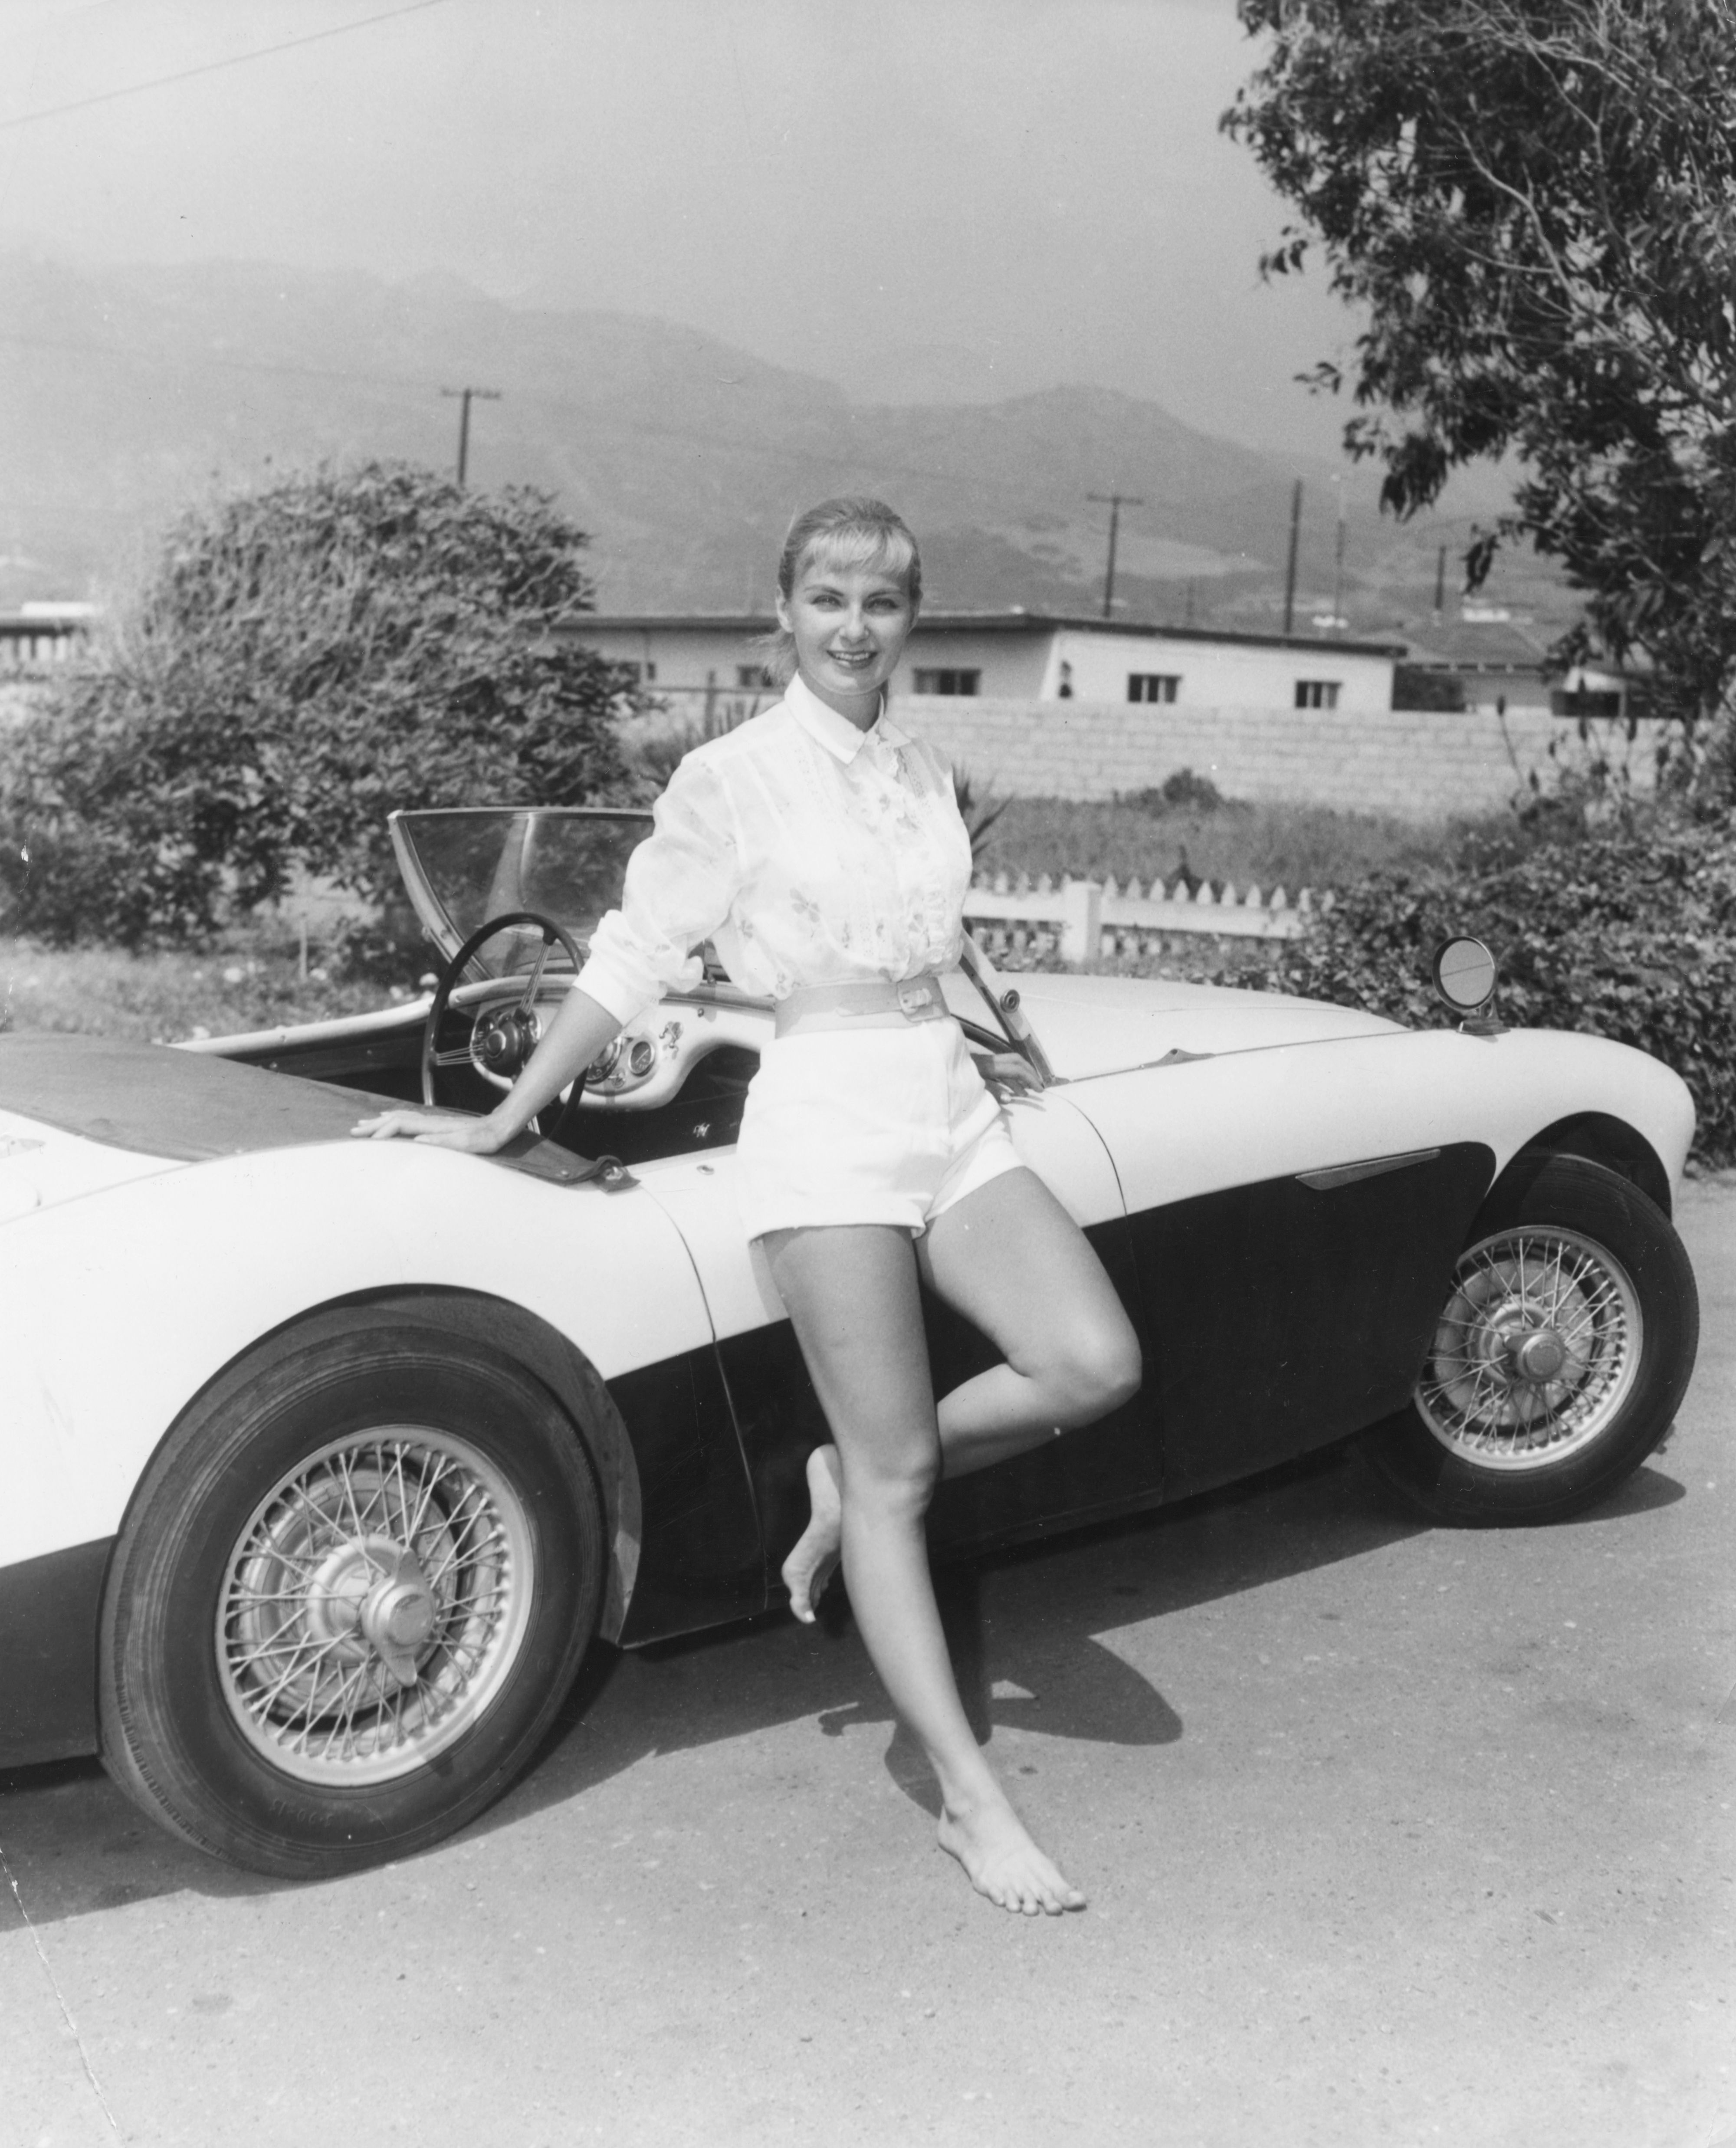  Joanne Woodward next to her car in Hollywood, November 1957. | Source: Getty Images